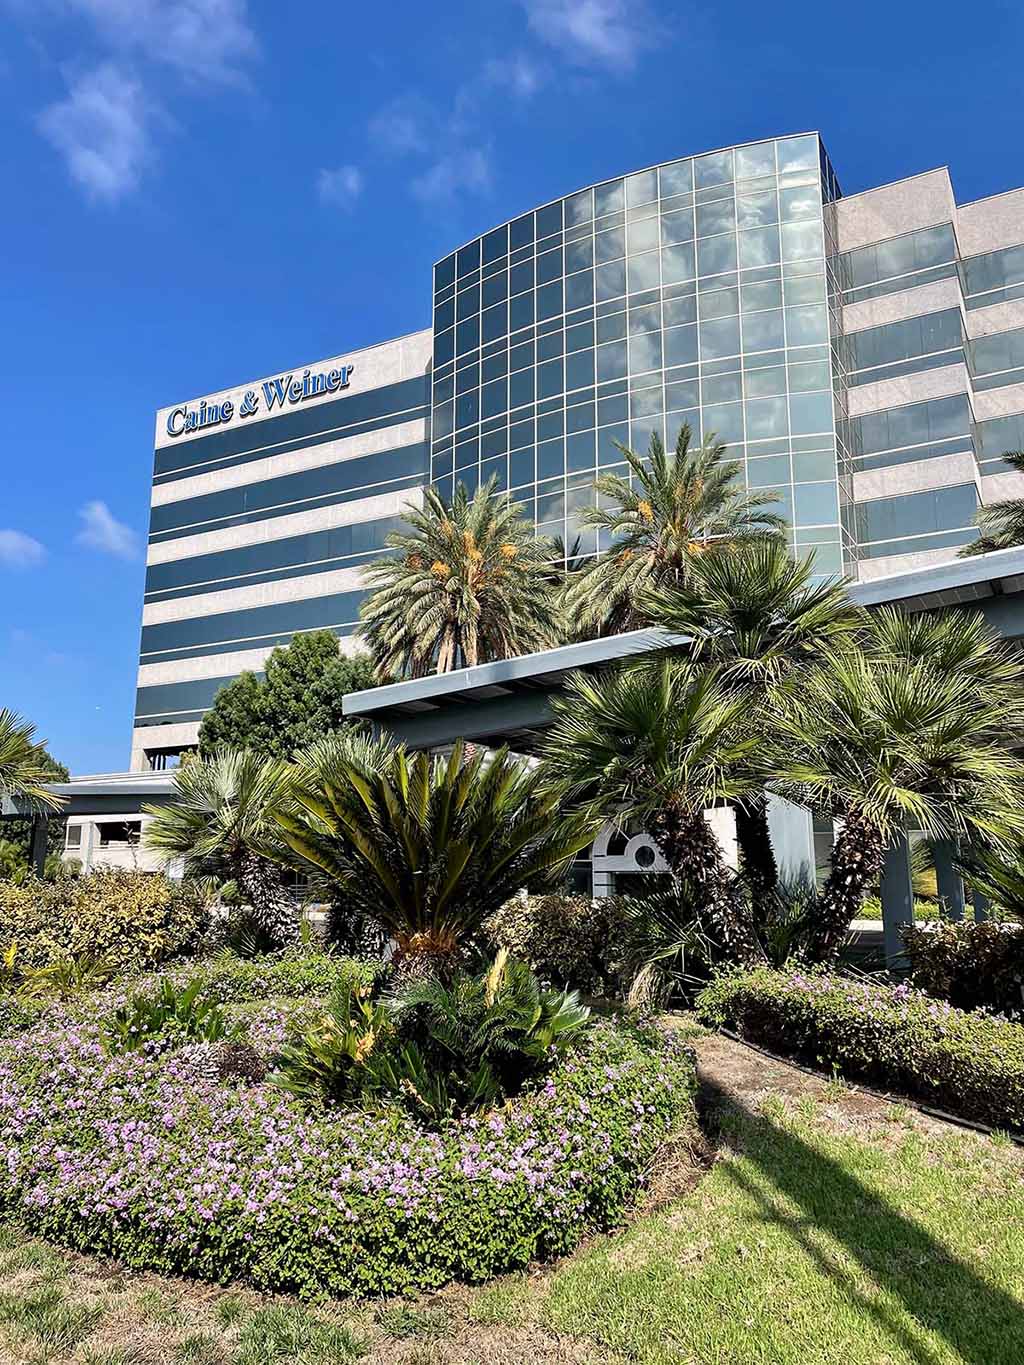 Southern California Multi-Specialty Center serves patients from Culver City